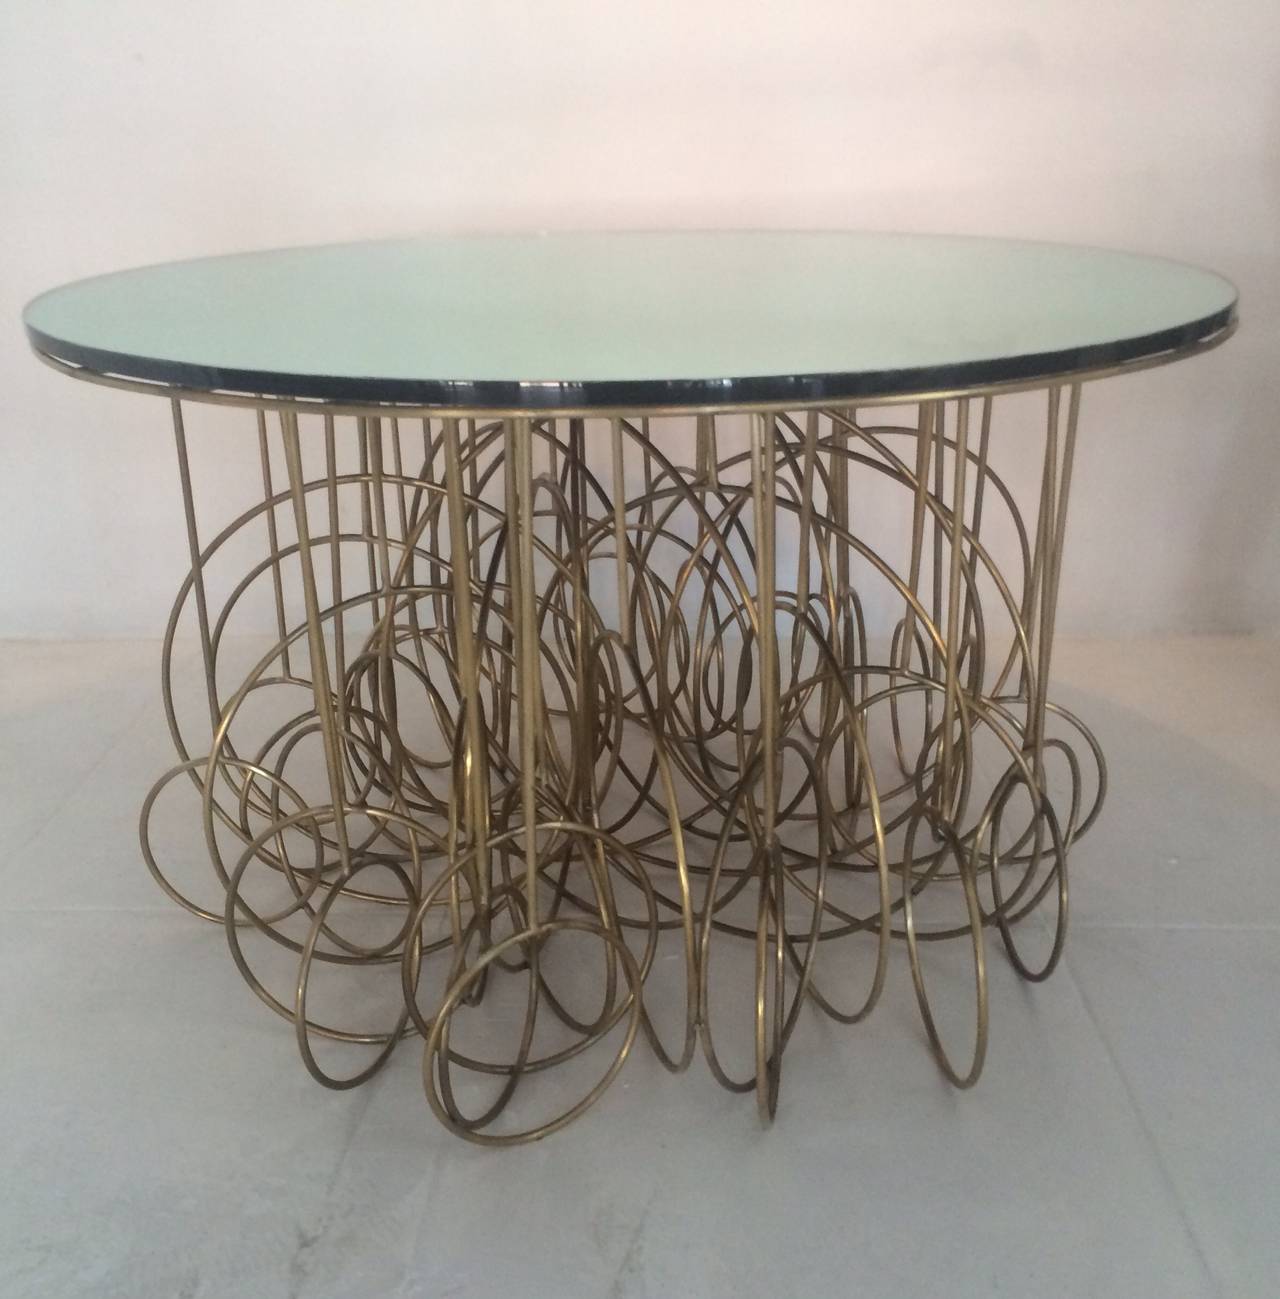 A fabulously extravagant French brass table. Top is a 3/4 inch thick straight polished mirrored glass, c.1980s